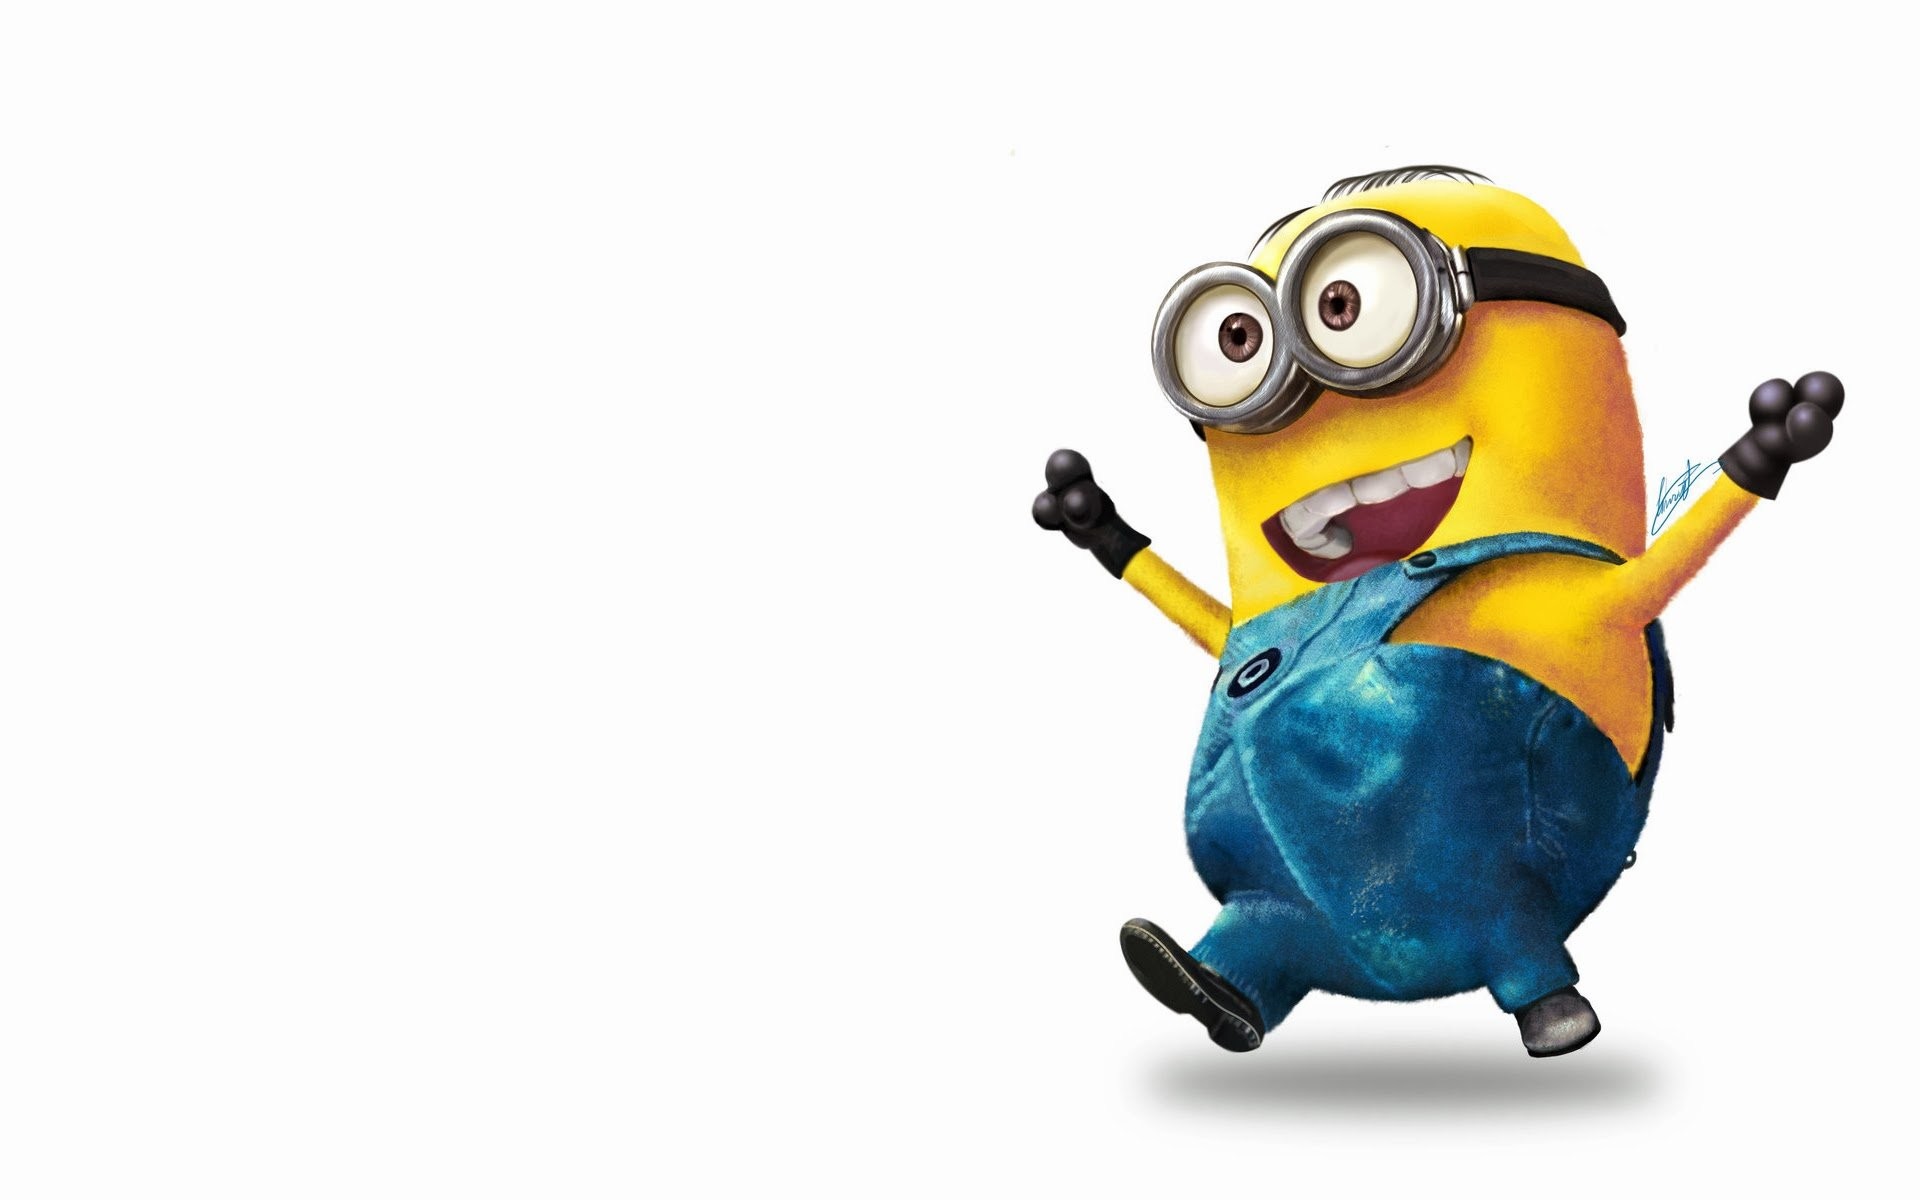 Minion Wallpaper For Android 80 Images